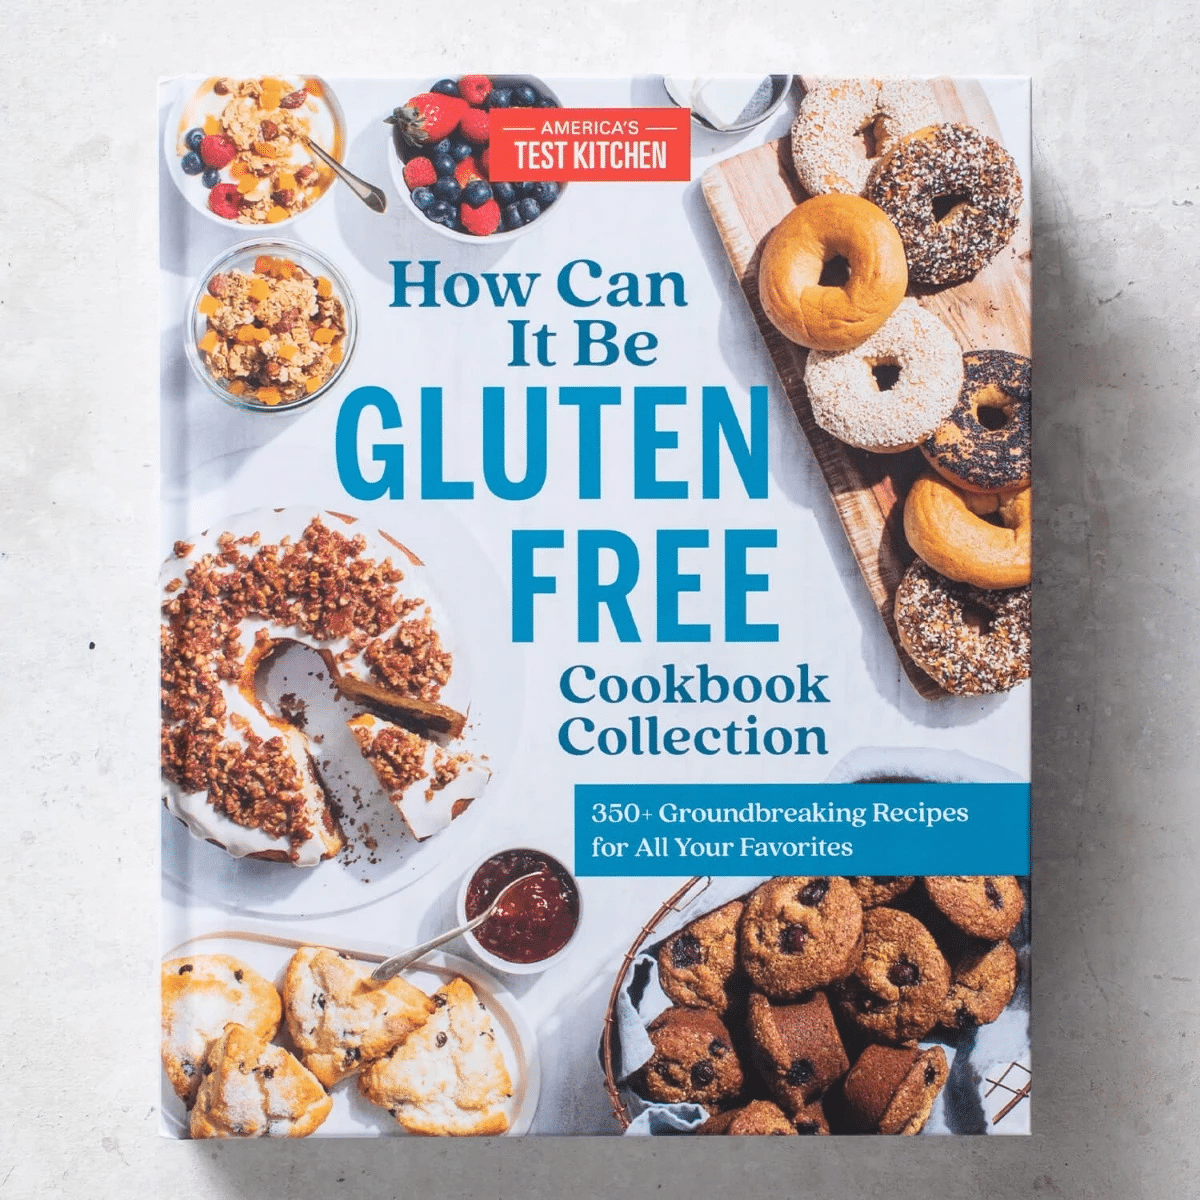 How Can it be Gluten Free from America’s Test Kitchen – Cookbook Spotlight